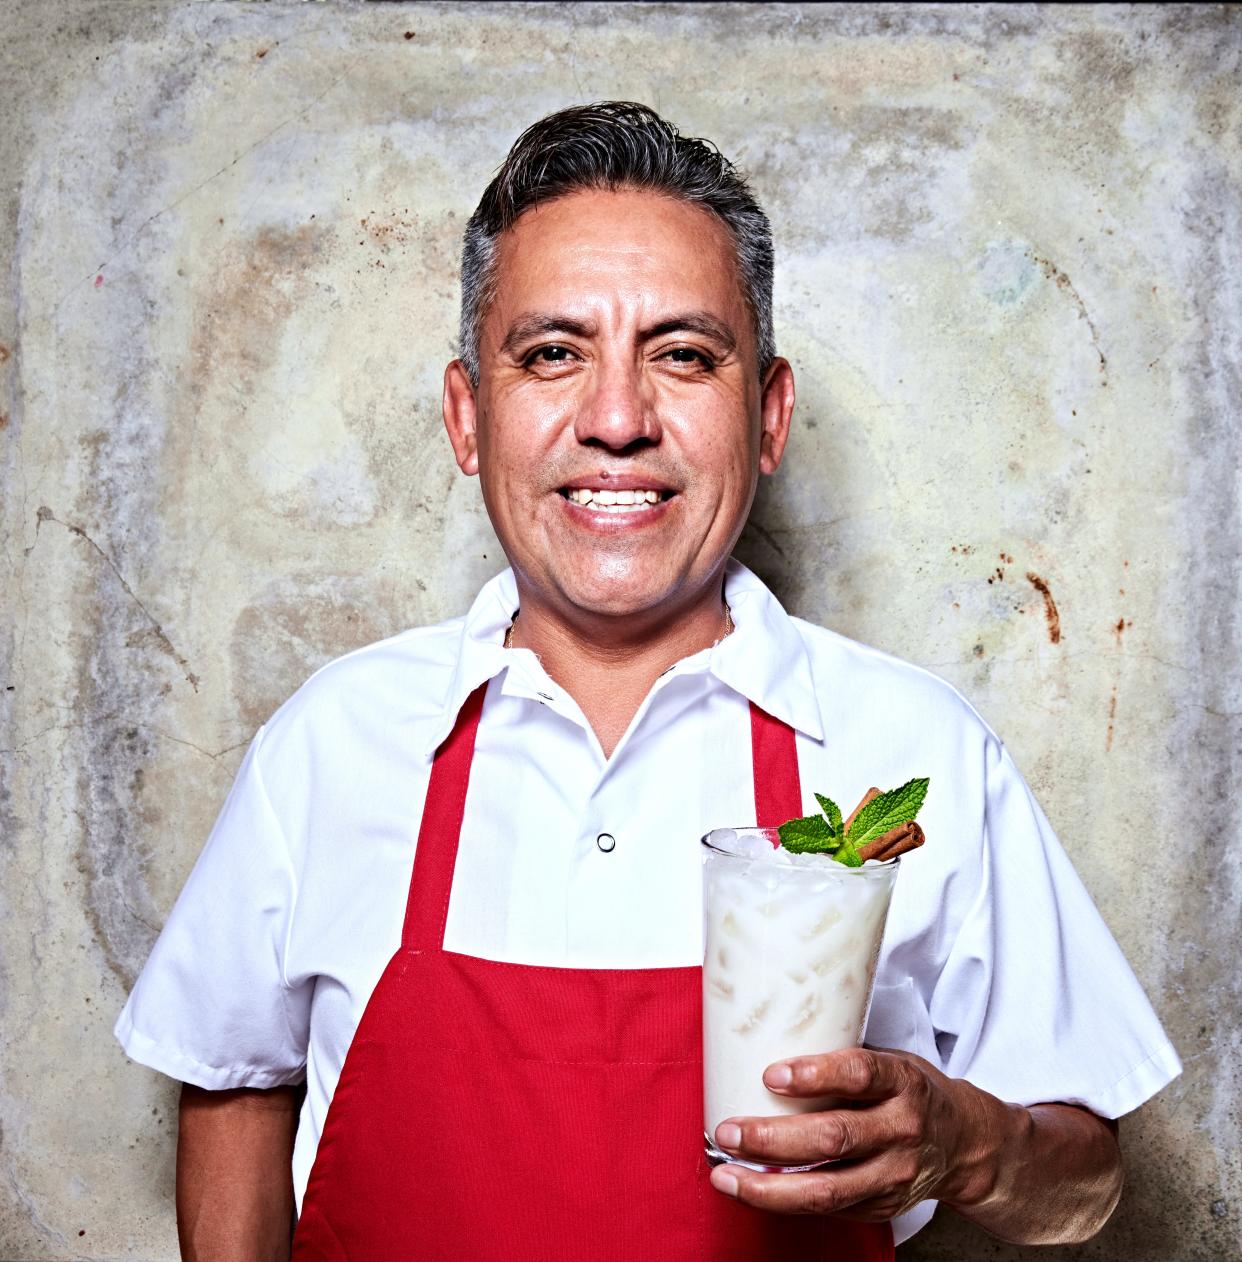 Moonshine veteran chef Robert Campos, a native of Central Mexico, opened Masa y Mas with Moonshine and Hopdoddy co-founders Larry Perdido and Chuck Smith.